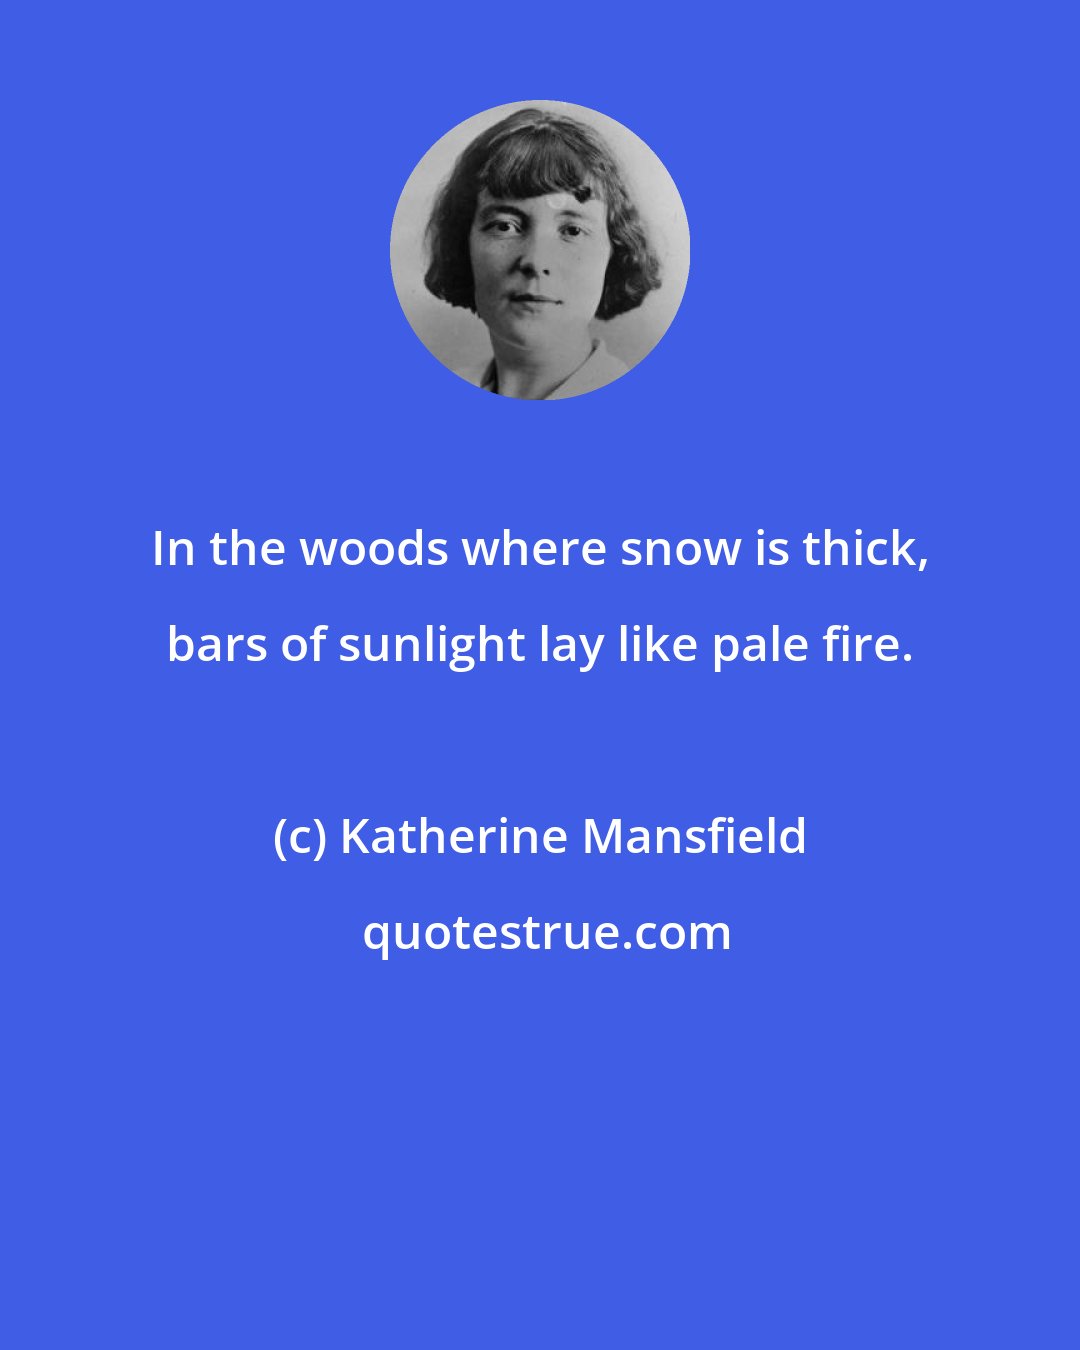 Katherine Mansfield: In the woods where snow is thick, bars of sunlight lay like pale fire.